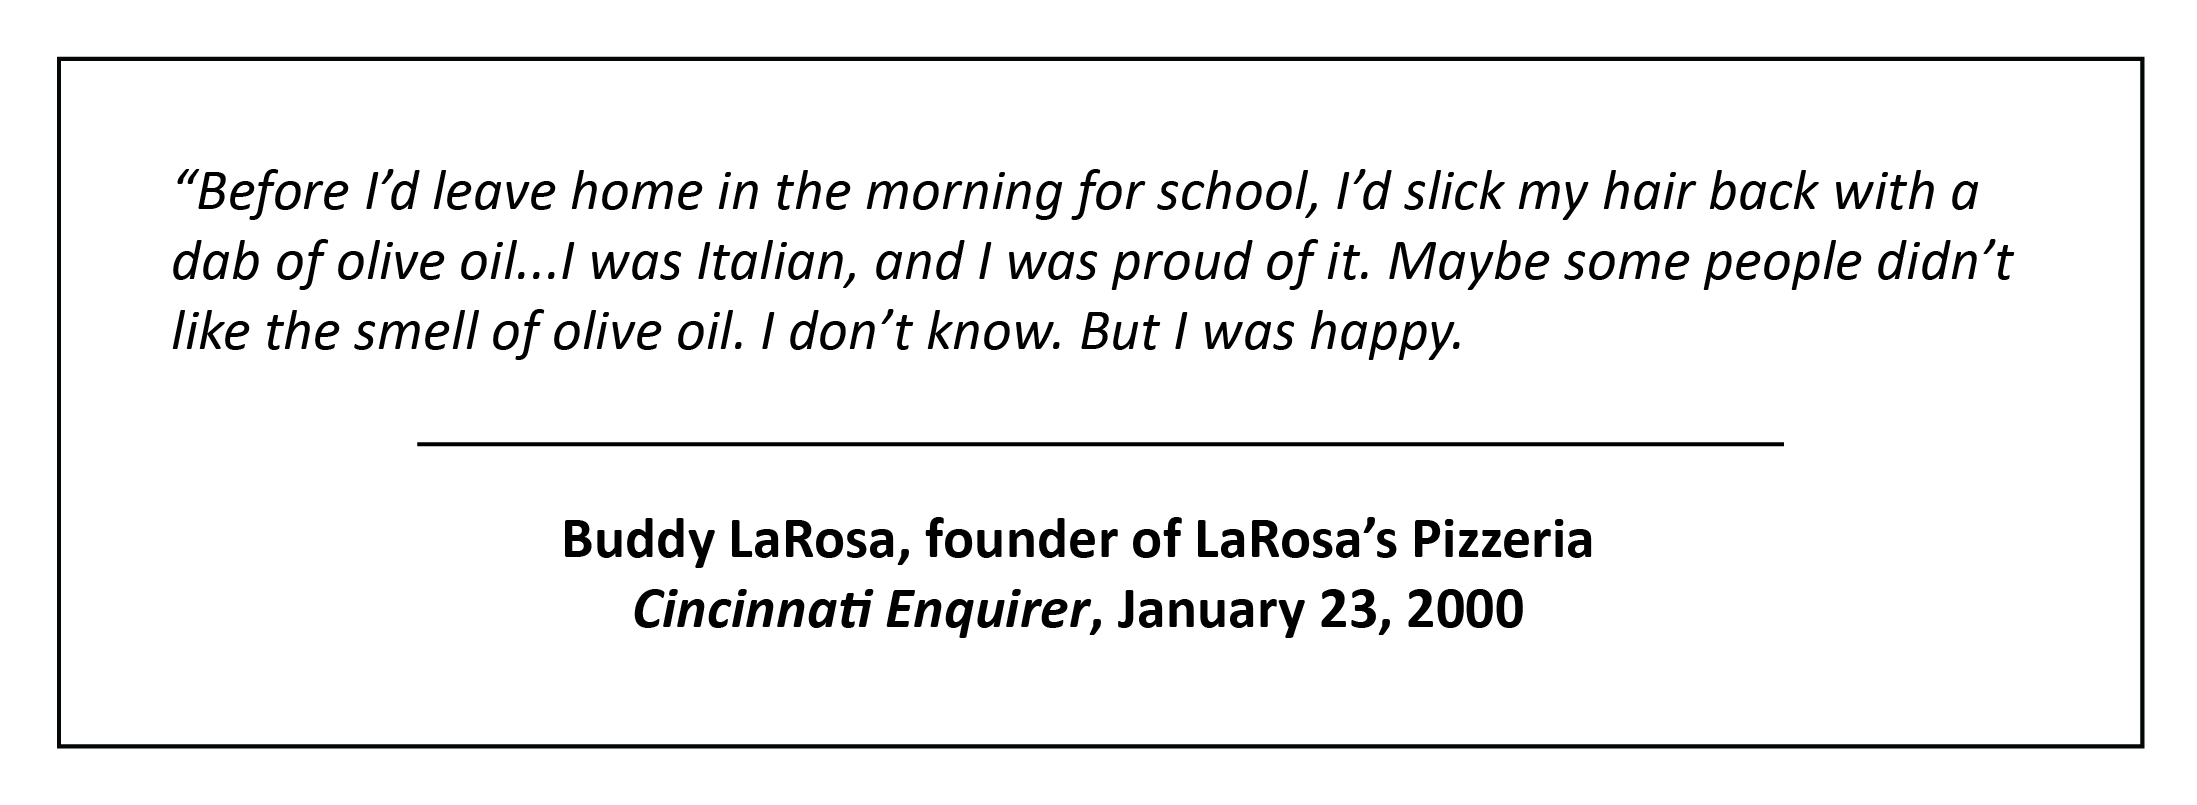 Quote from Buddy LaRosa about putting a dab of olive oil in his hair every day